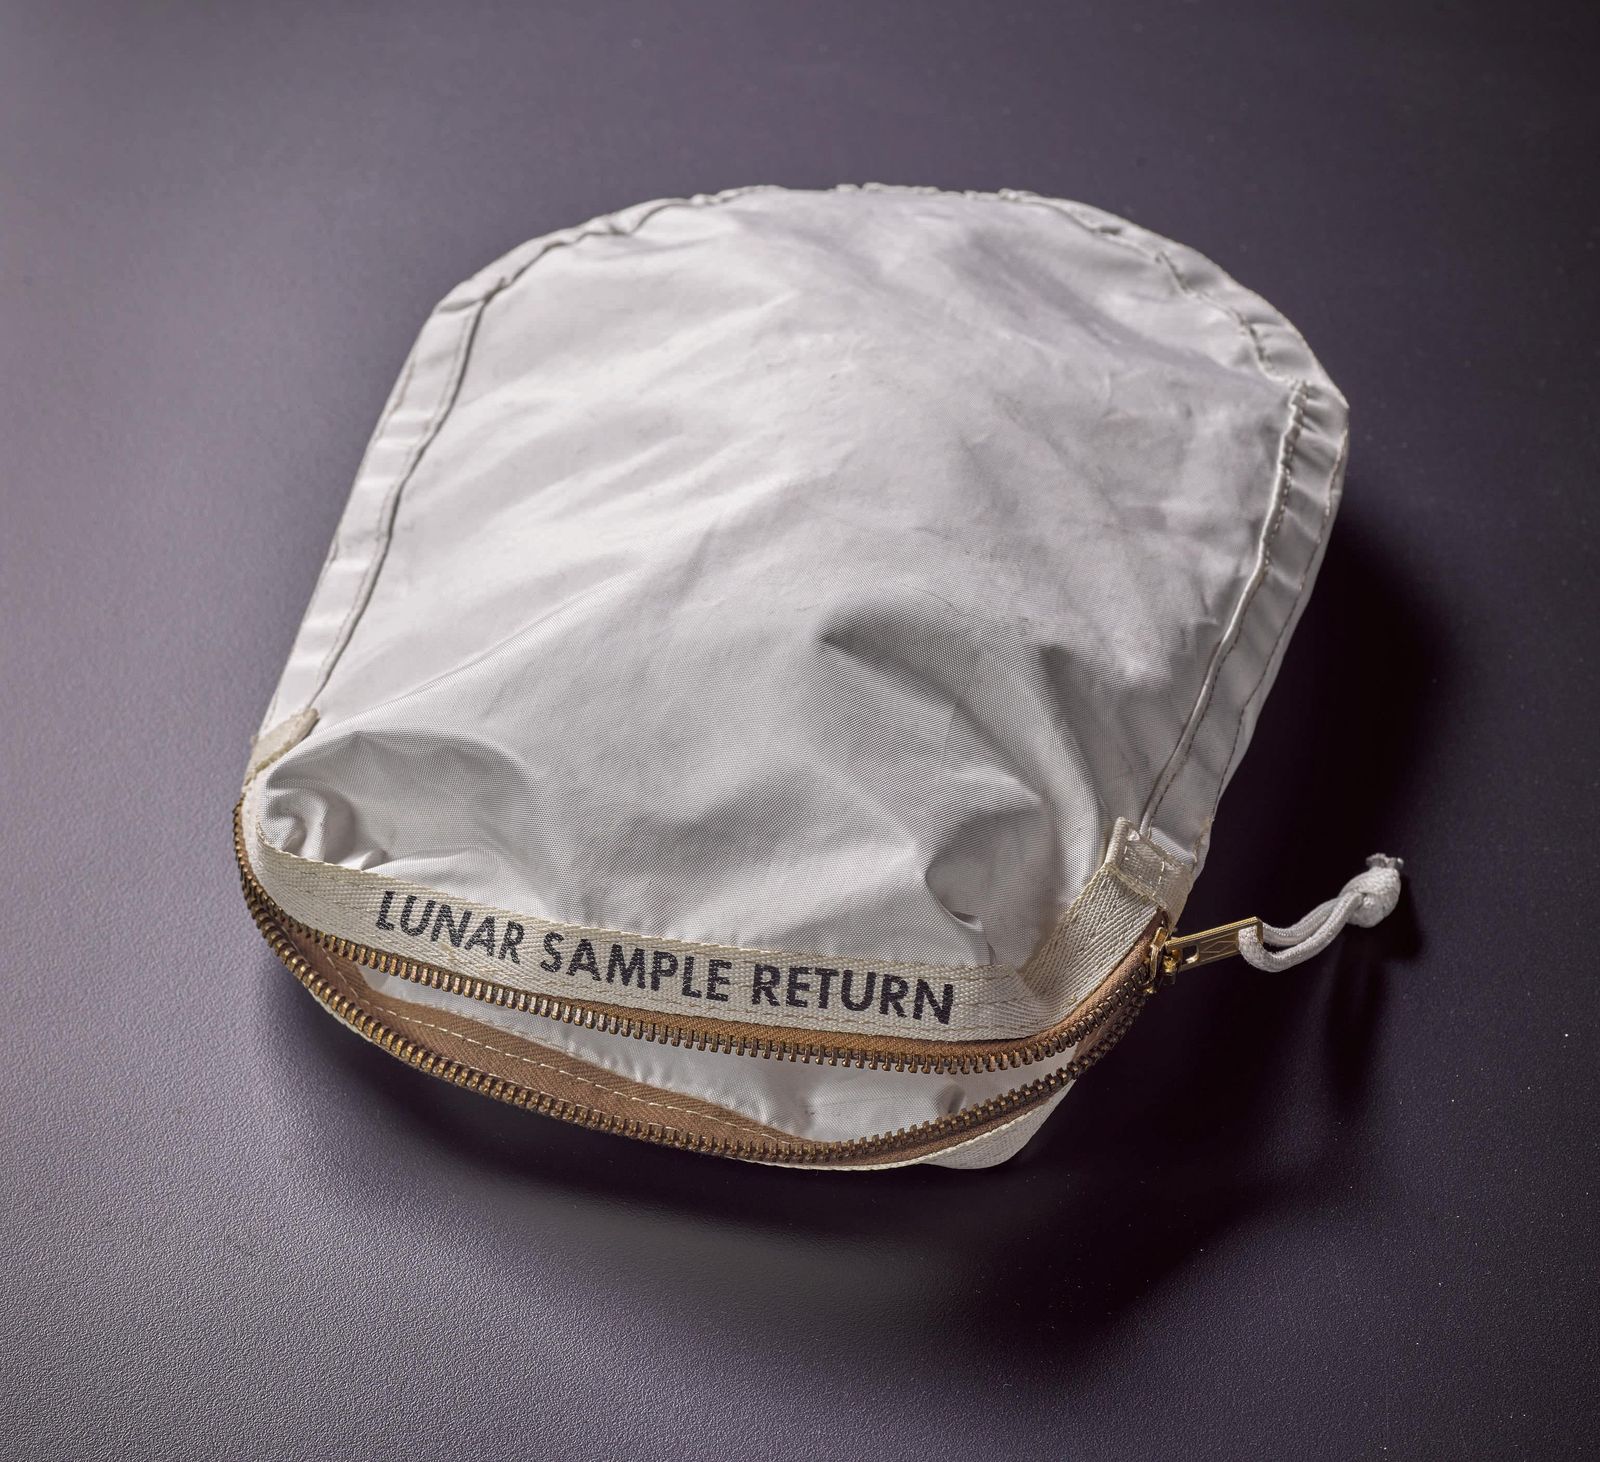 Apollo 11 Moon Rock Bag Sells for $1.8 Million in Controversial Auction, Smart News